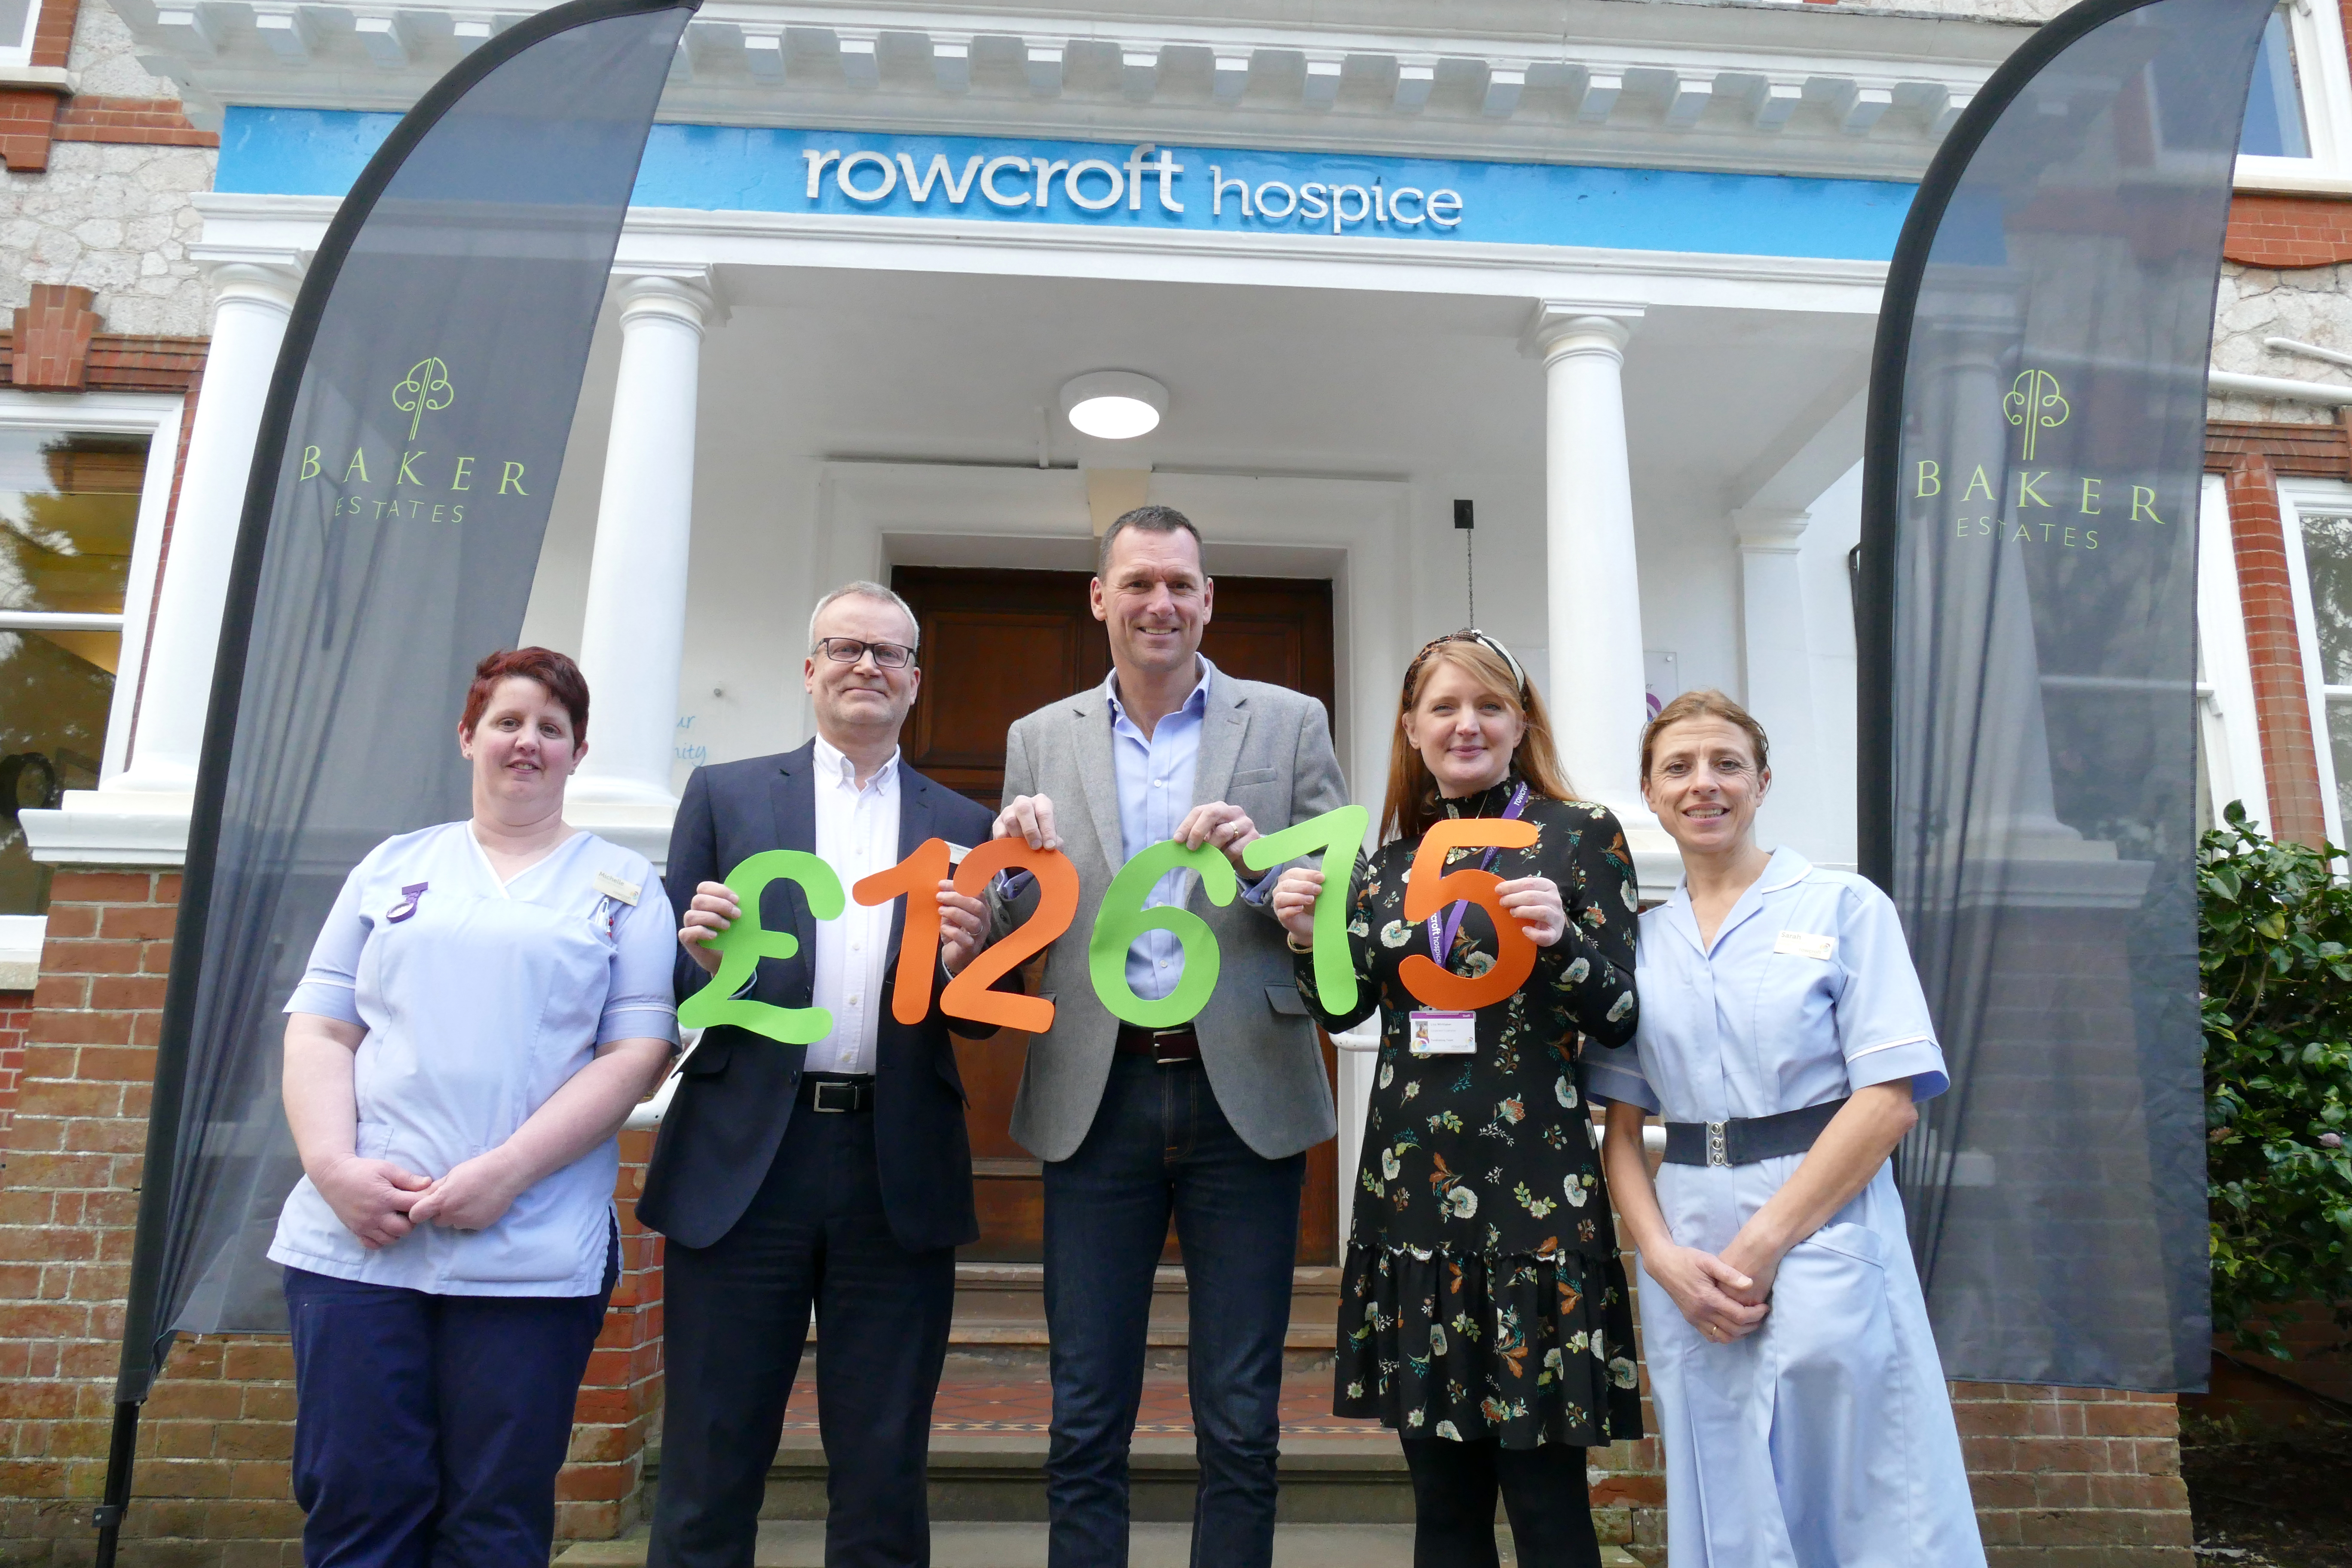 Local housebuilder Baker Estates, announces ongoing support with Rowcroft Hospice